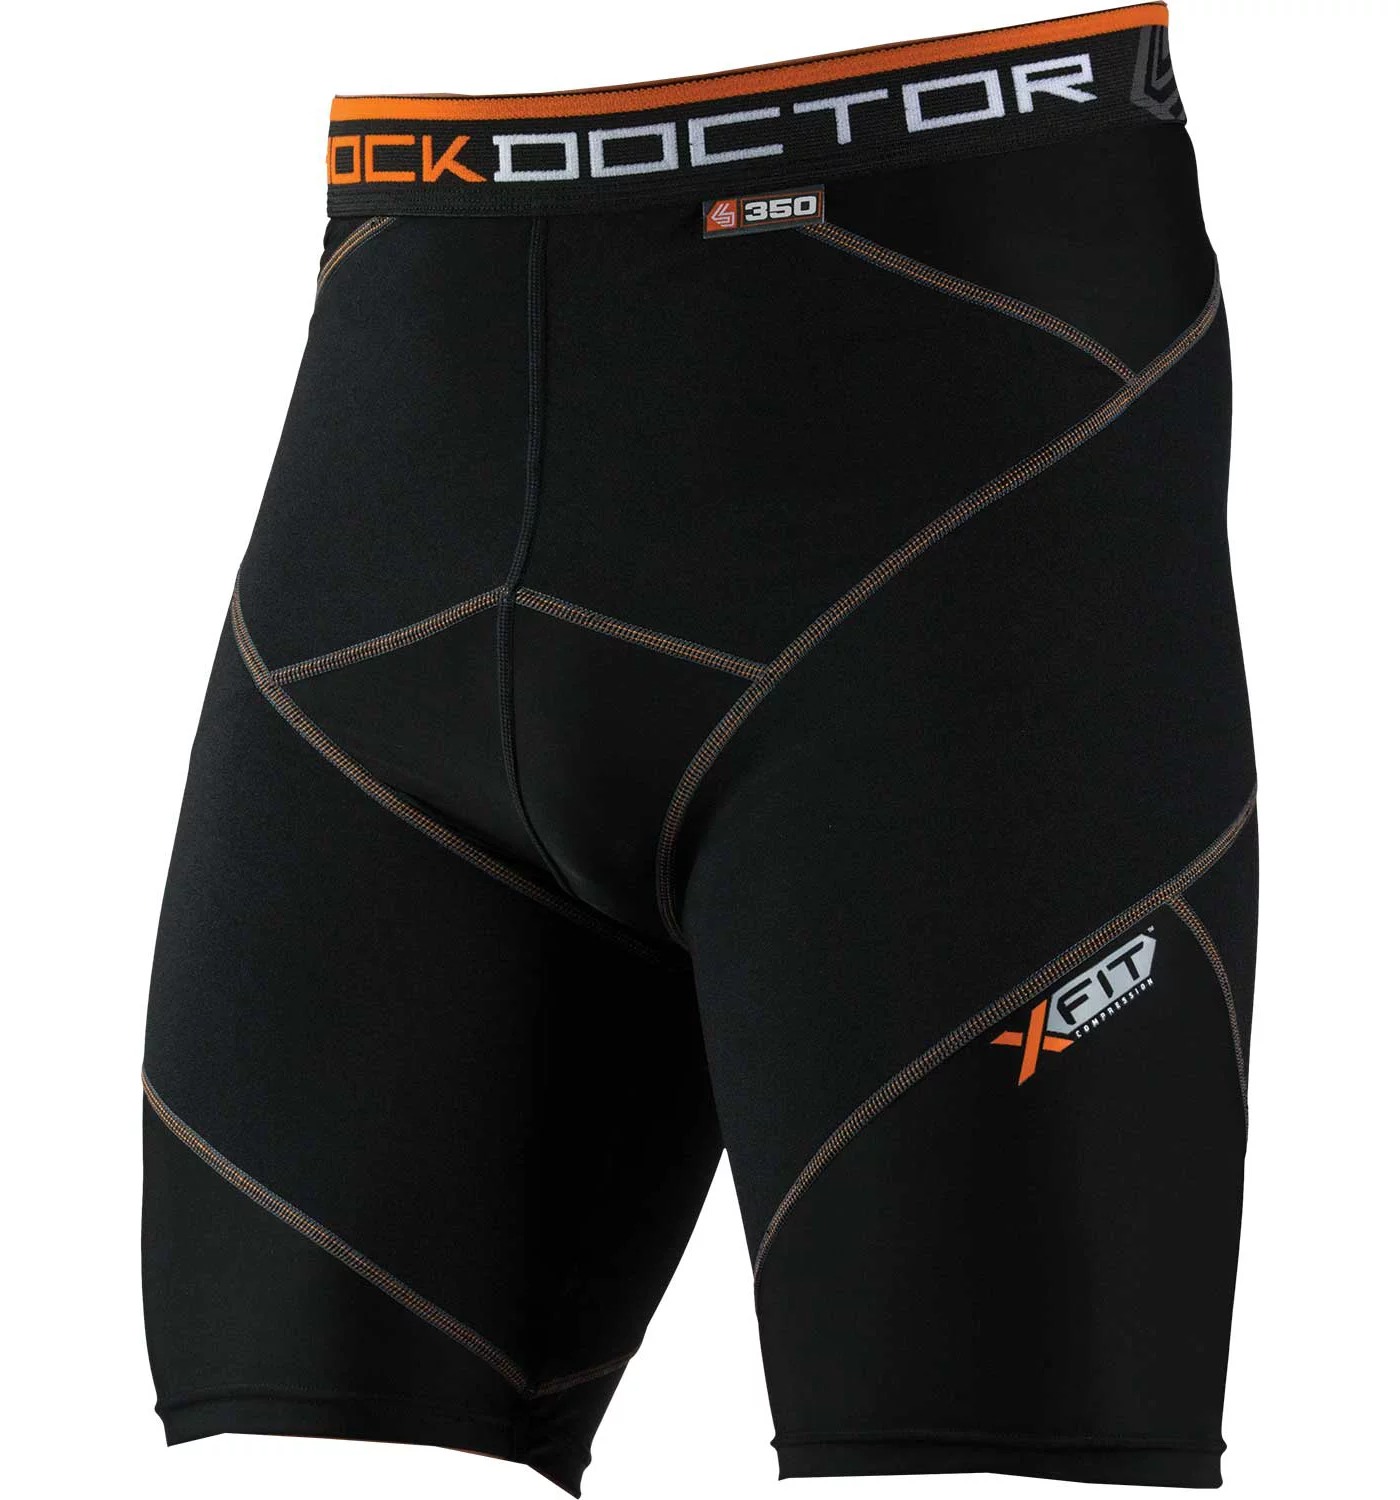 13 Incredible Shock Doctor Compression Shorts With Cup Pocket For 2023